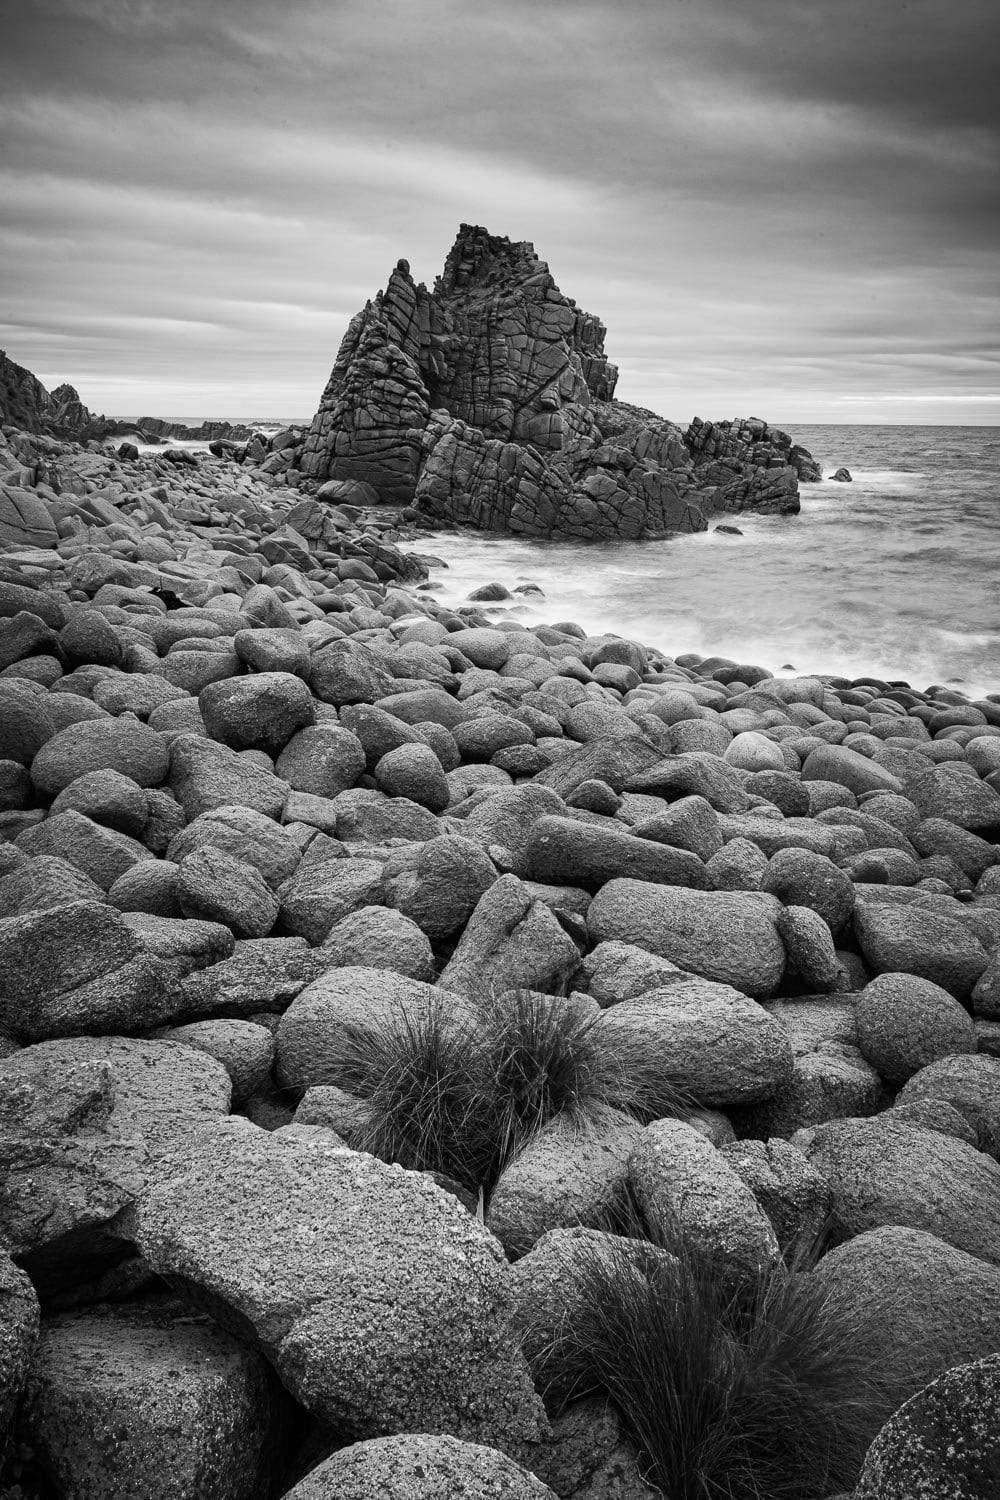 A beach with a lot of rounded stones and some standing sculpture of stones behind, The Pinnacles 7, Phillip Island